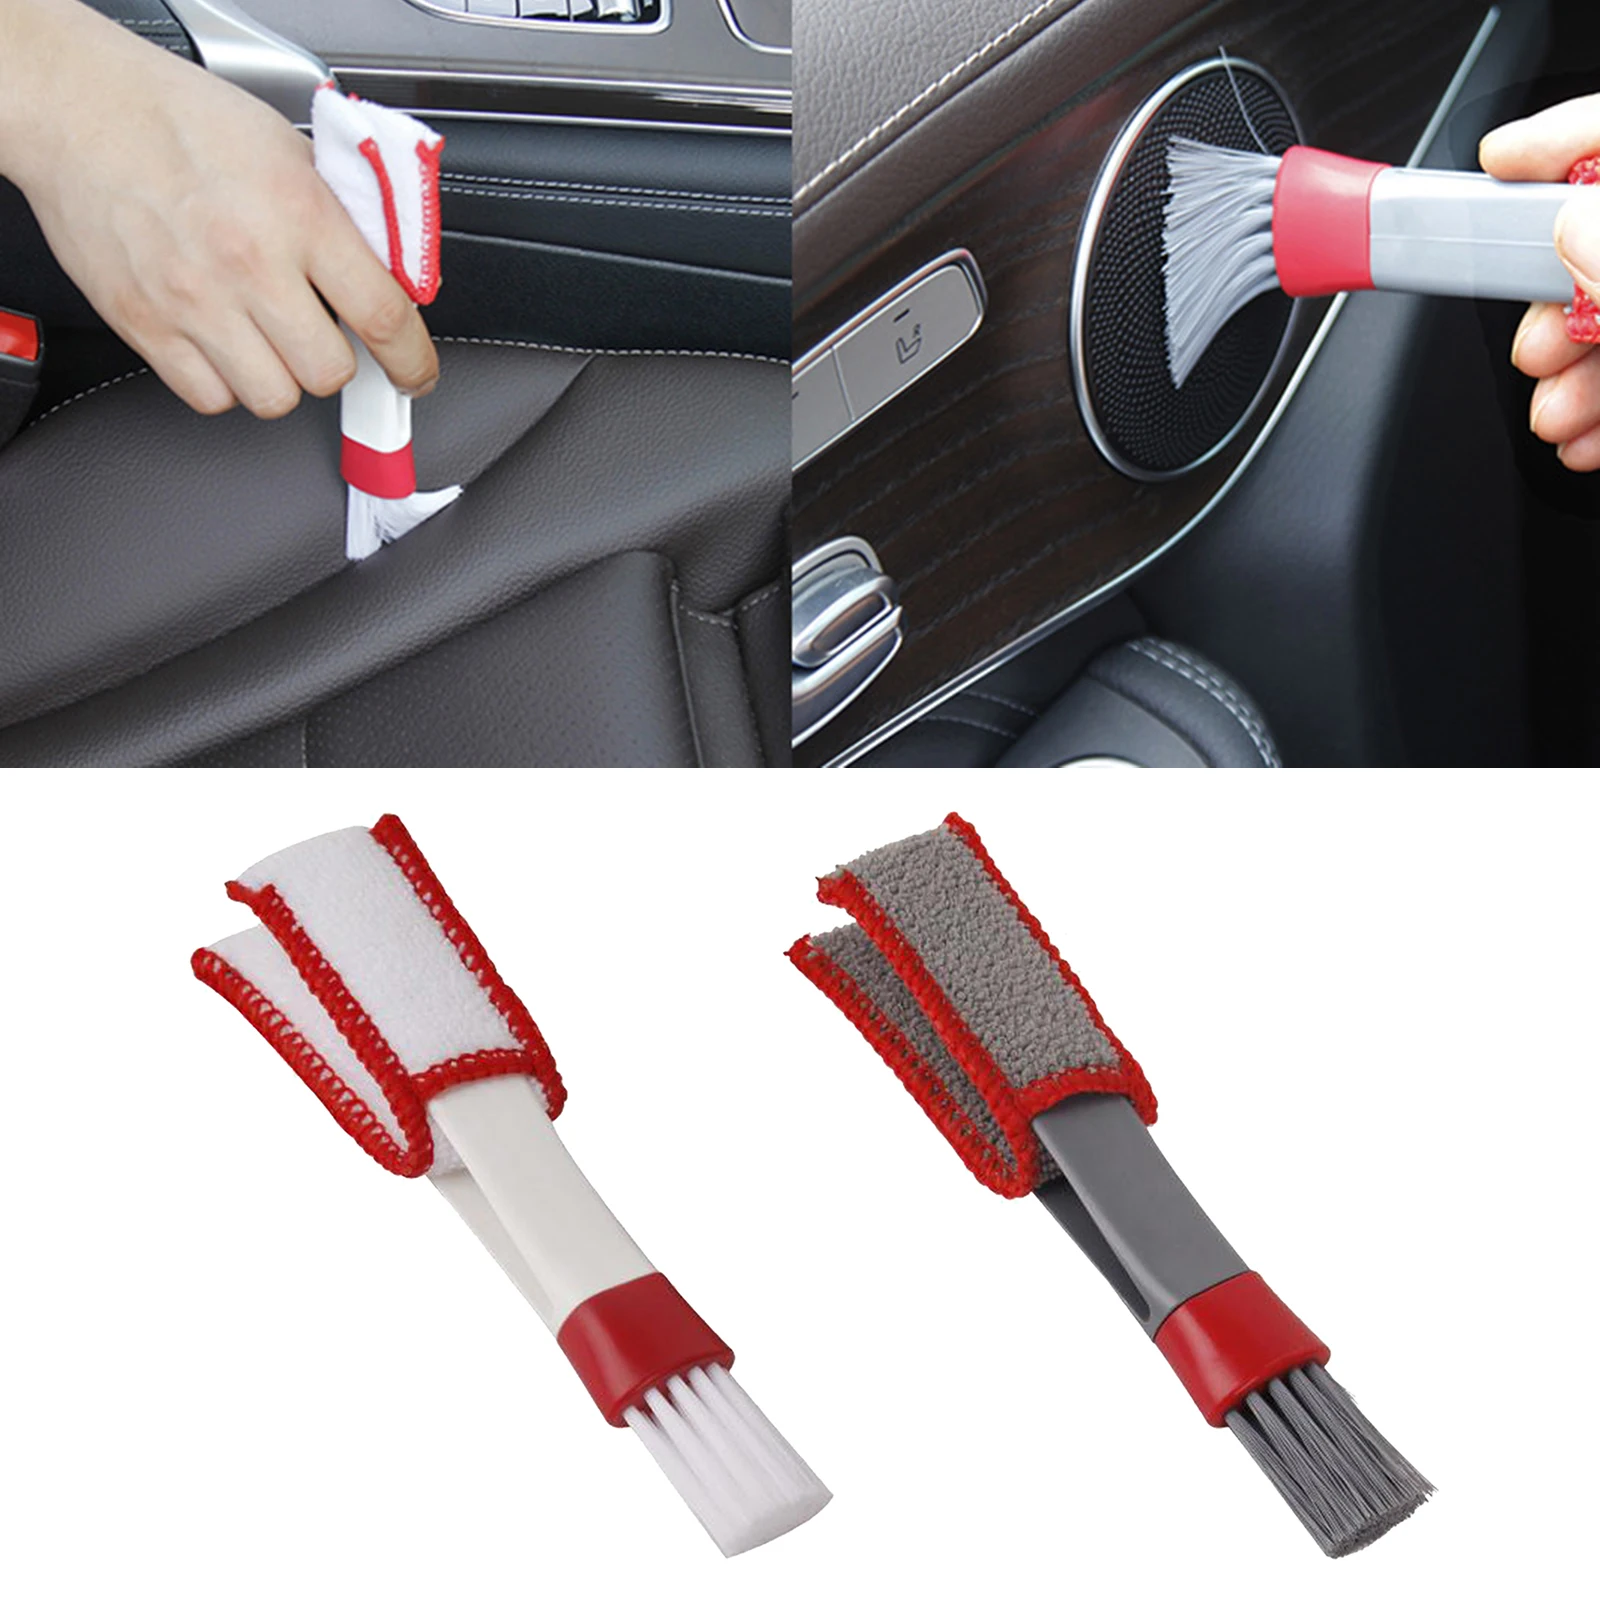 Portable Cleaning Brush Auto Car Air Conditioner Vent Windows Dust Cleaner